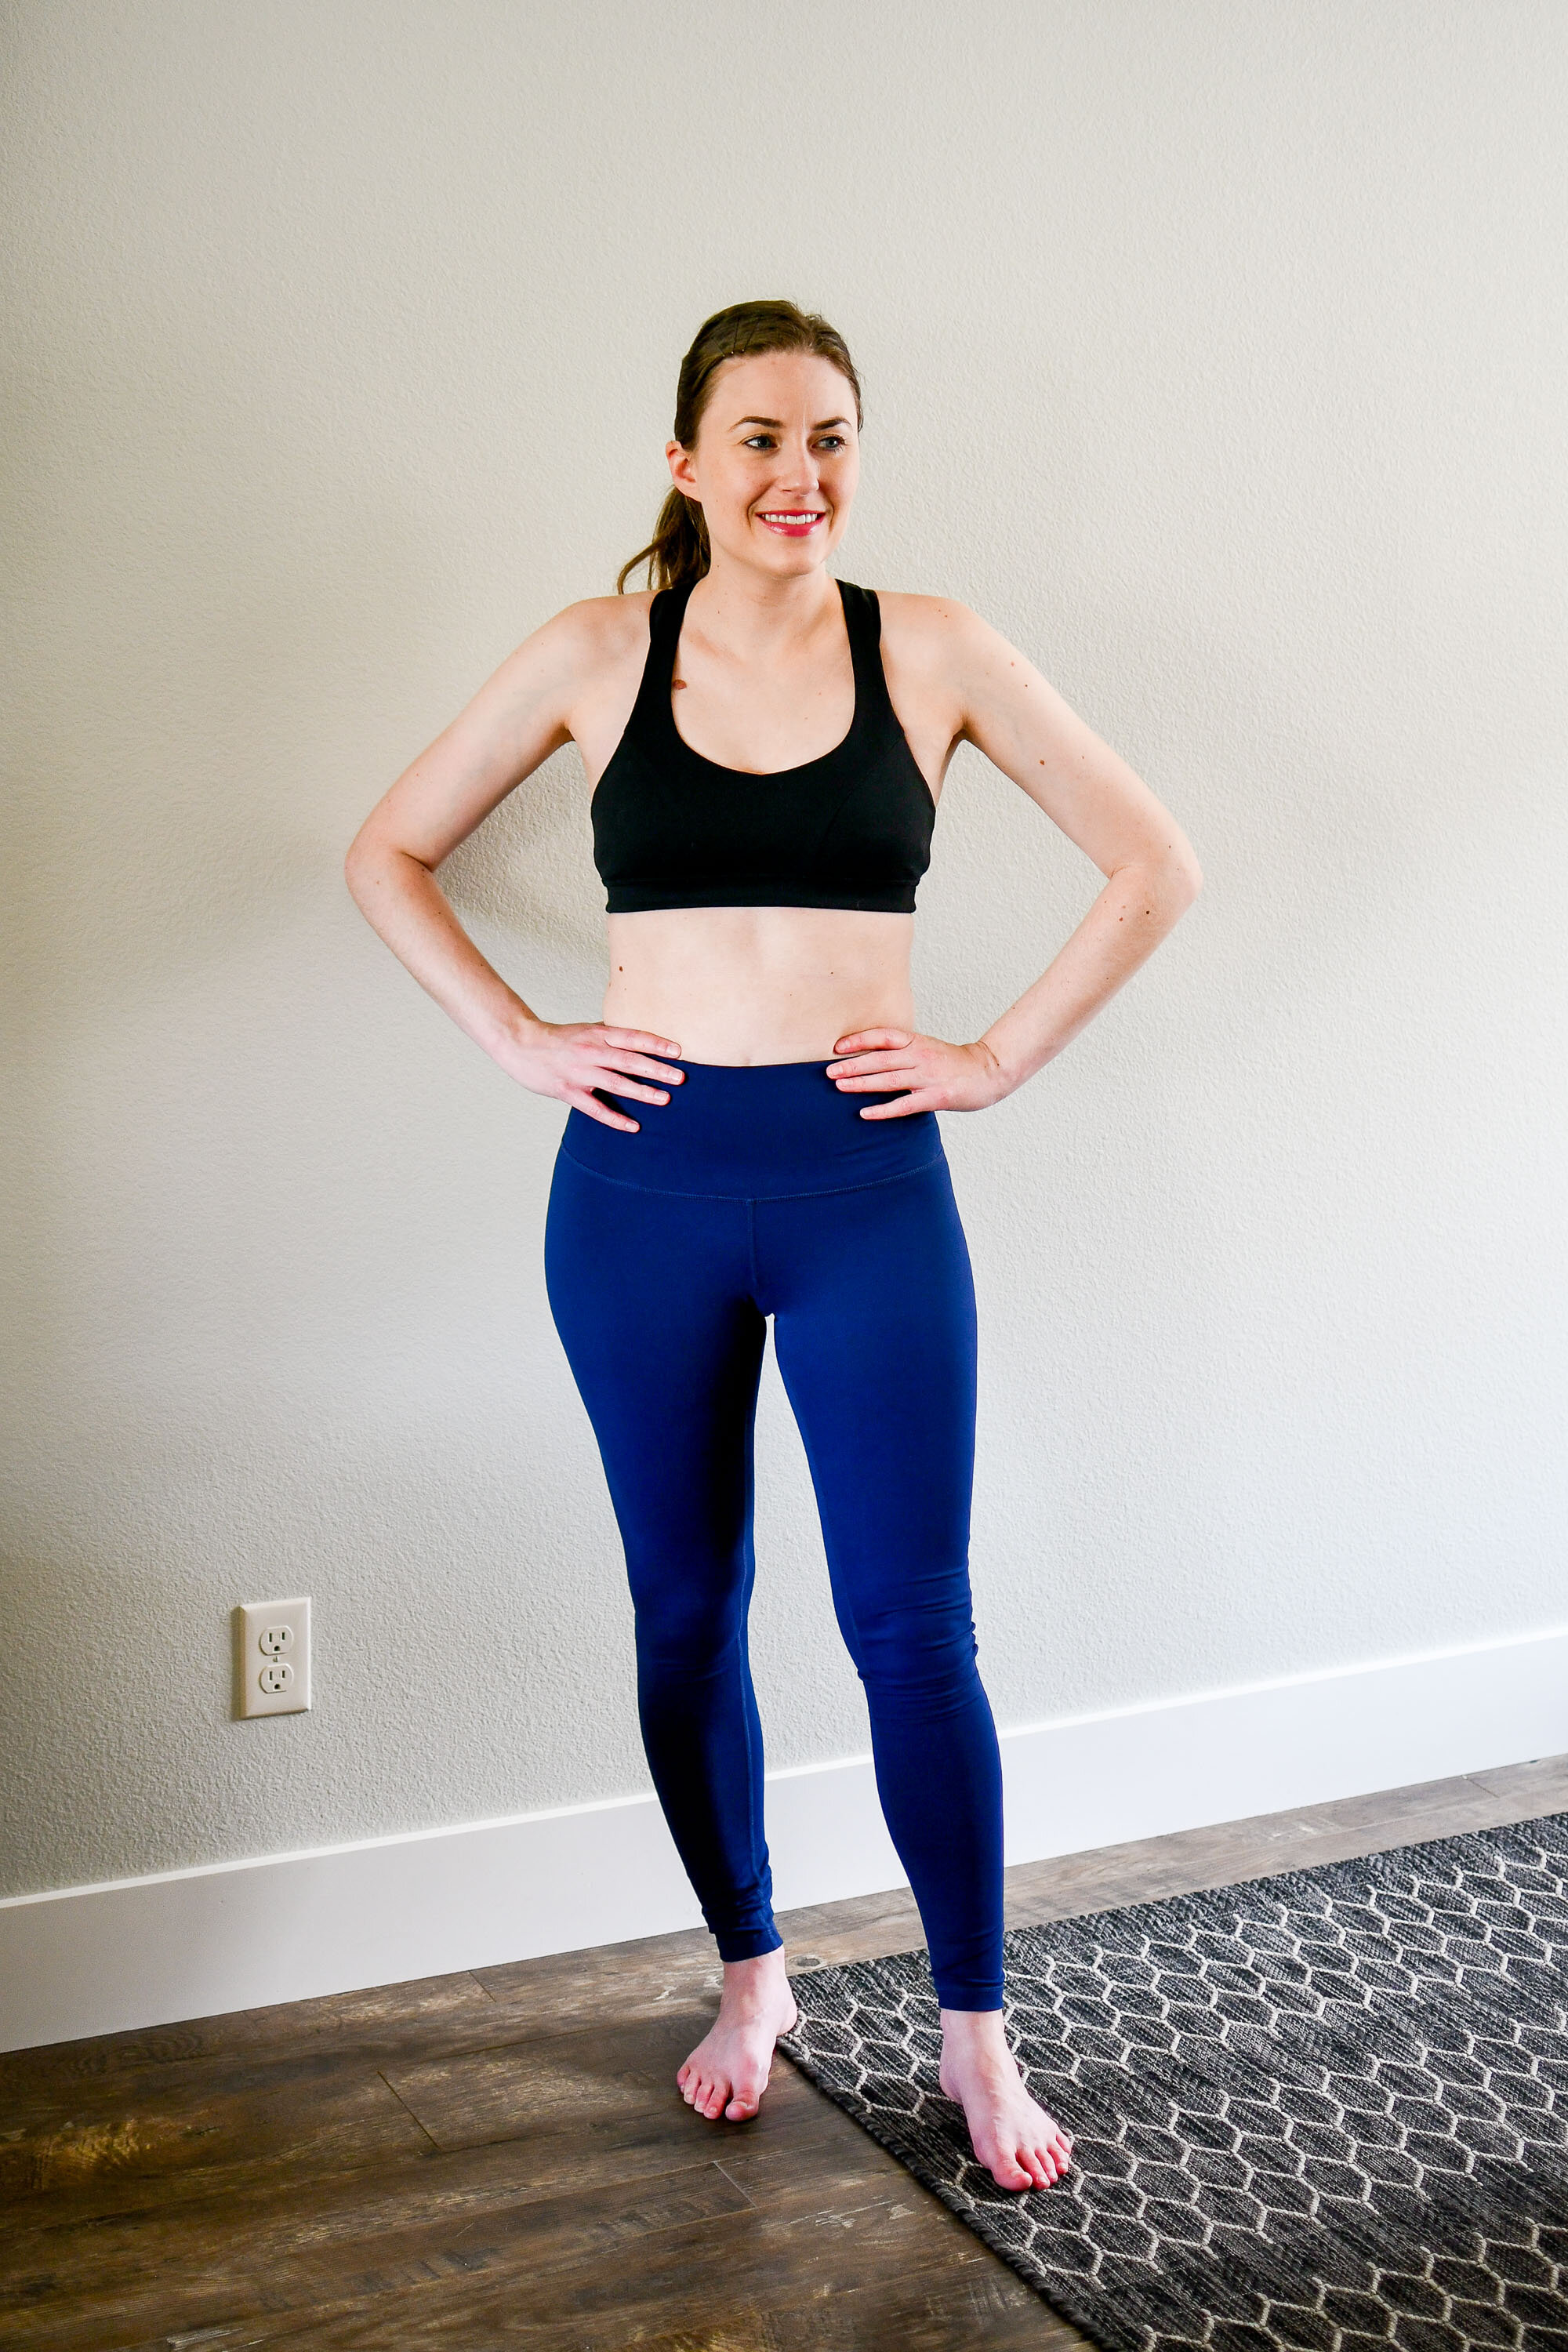 Z By Zella Leggings Review - Putting Me Together